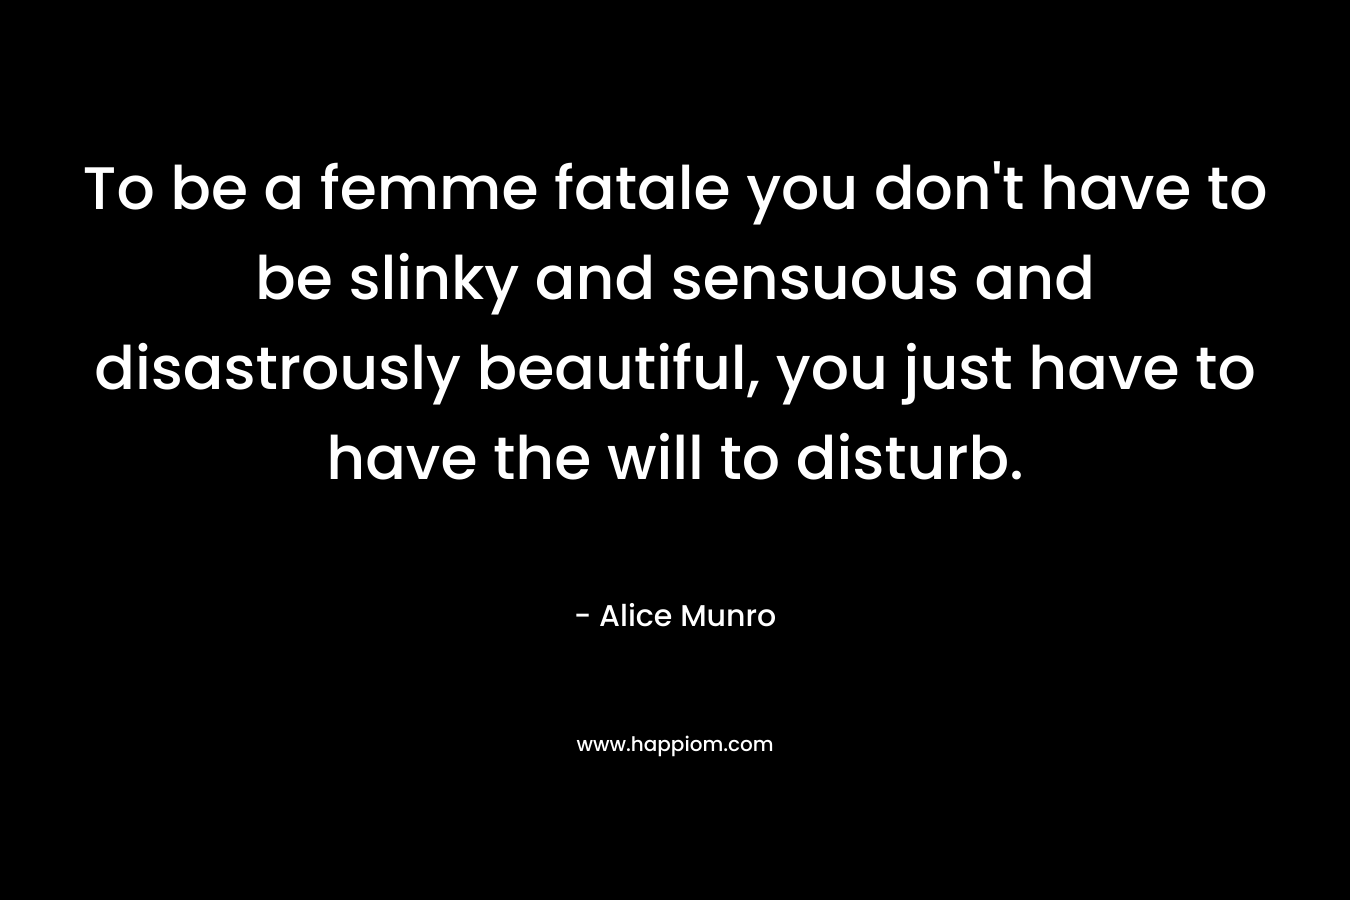 To be a femme fatale you don’t have to be slinky and sensuous and disastrously beautiful, you just have to have the will to disturb. – Alice Munro